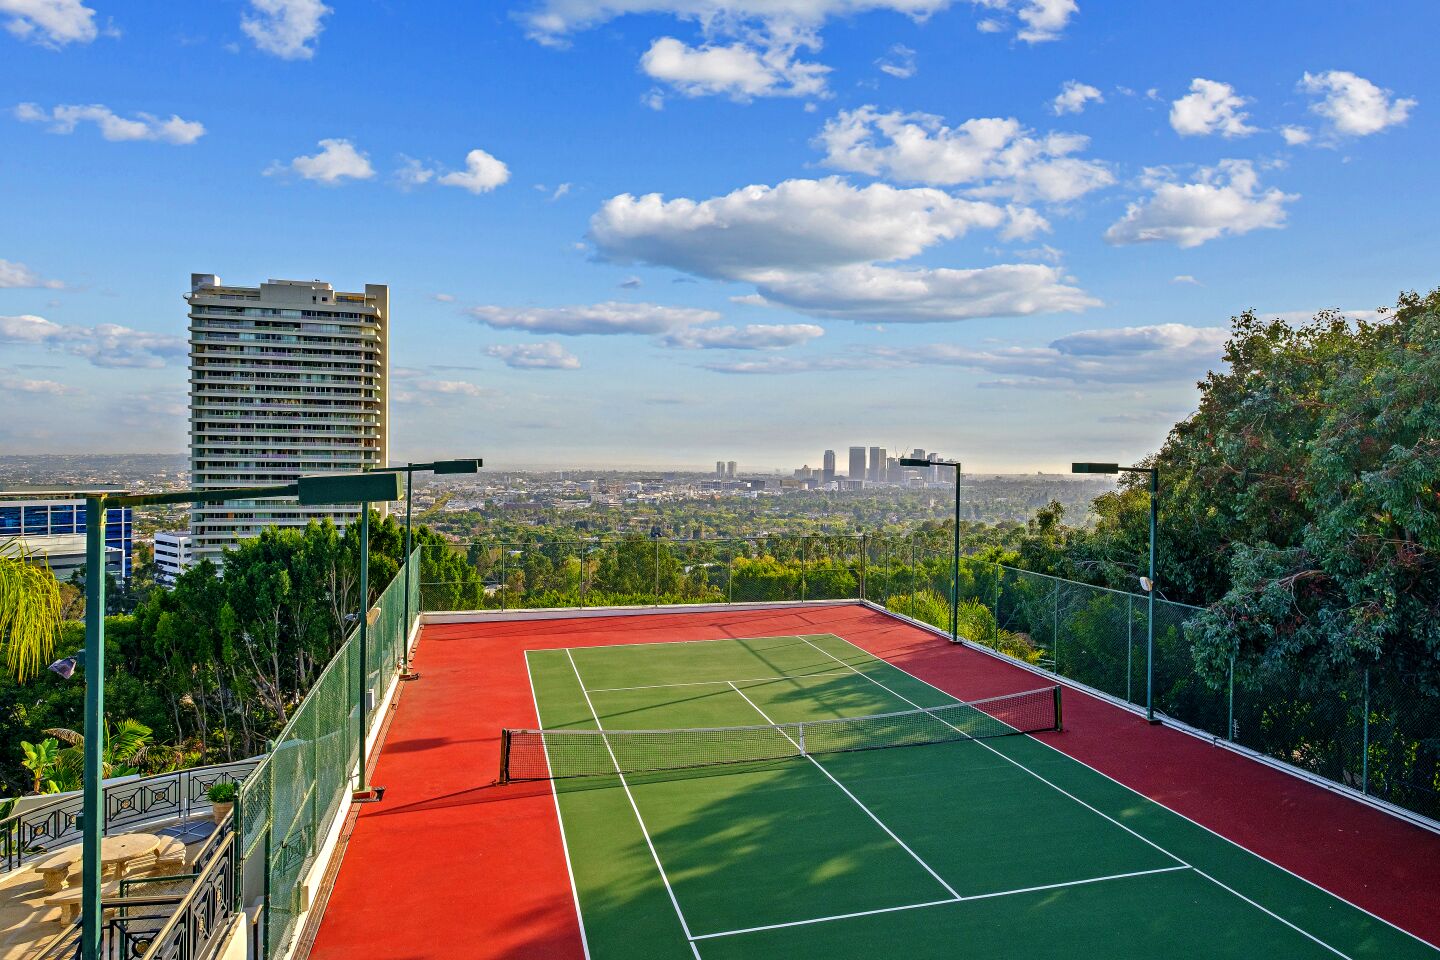 The estate includes a tennis court with a sweeping view from above the Sunset Strip.